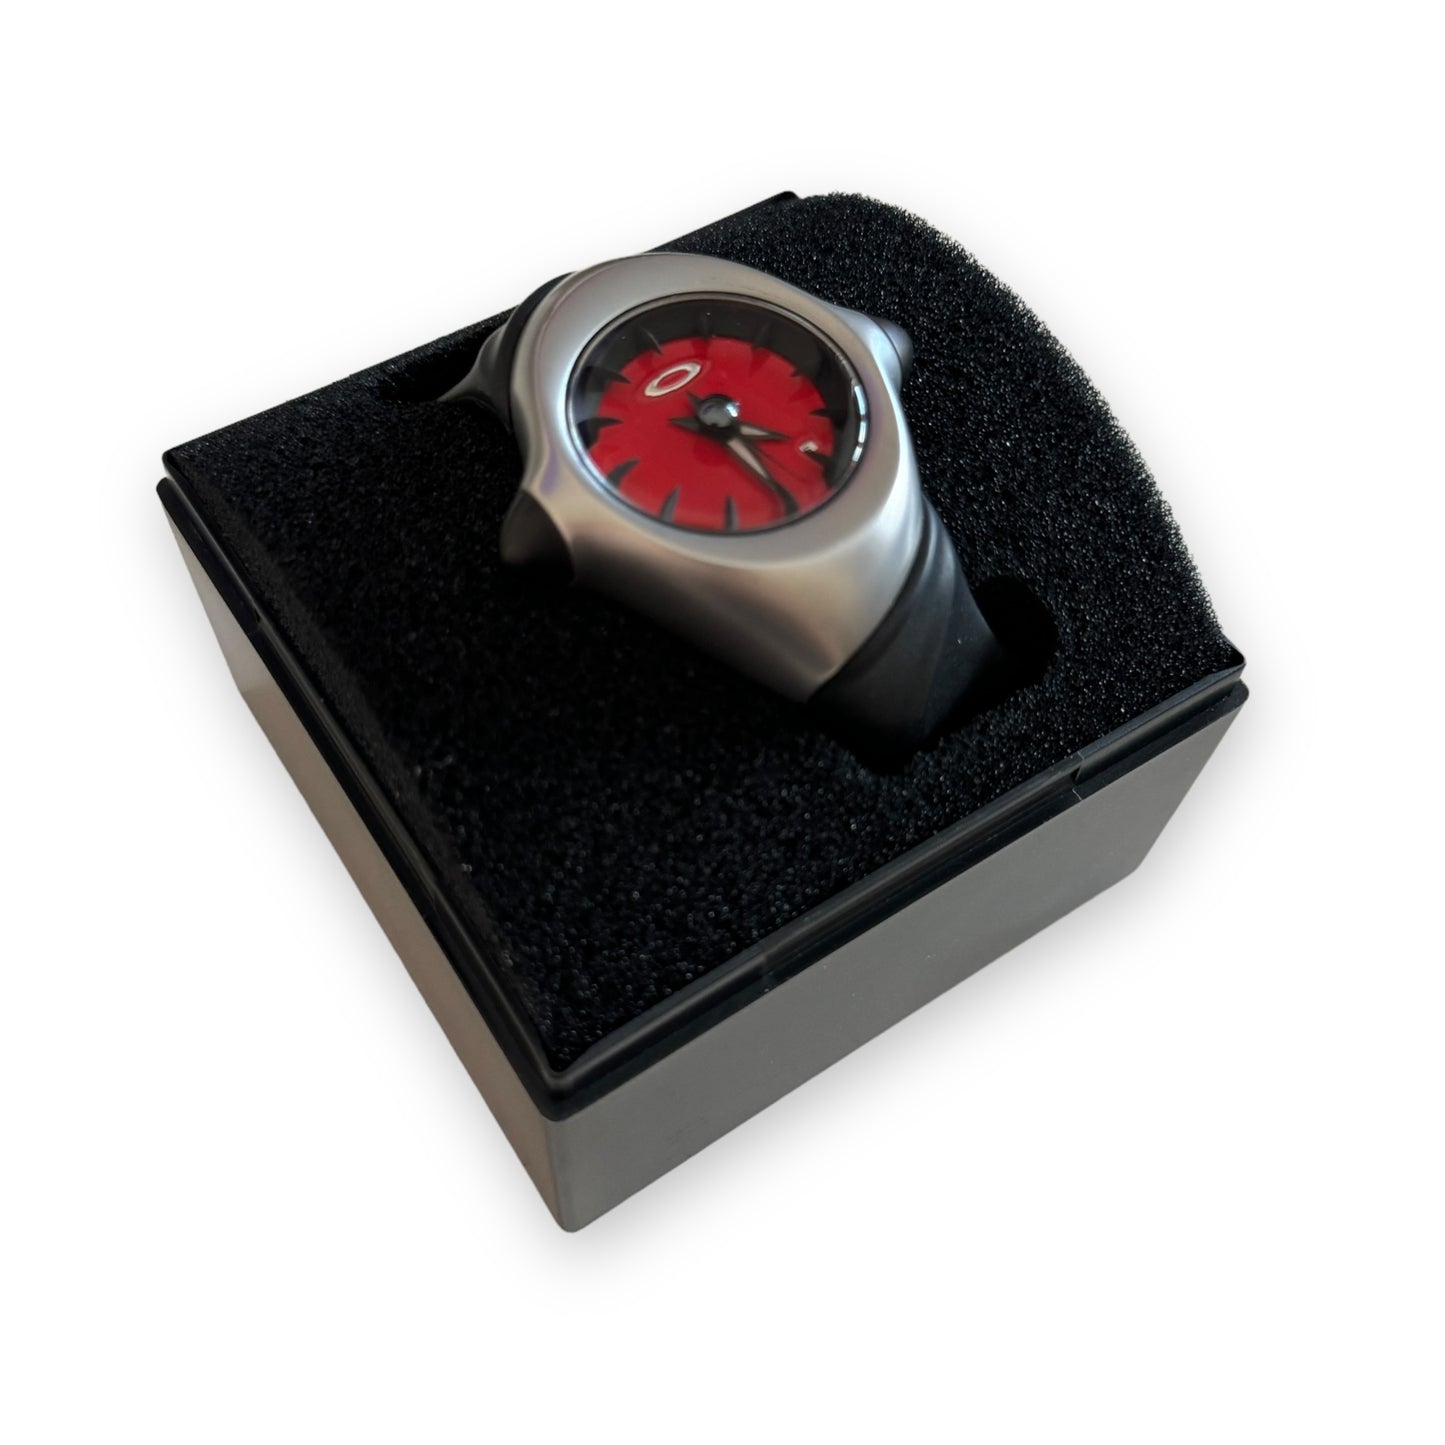 Oakley Crush Watch Red Dial